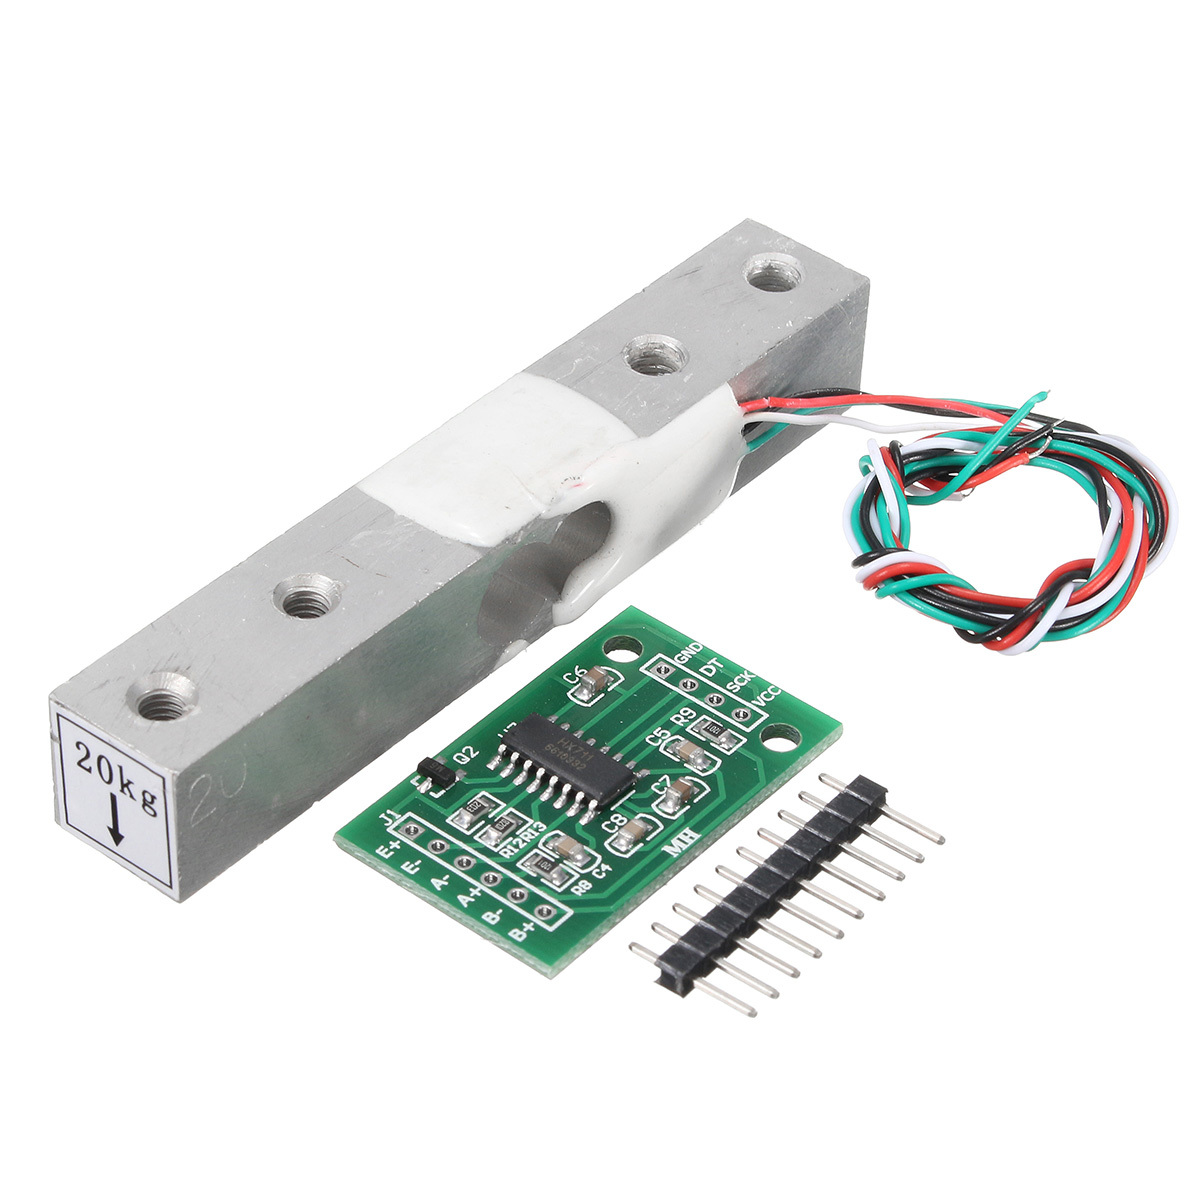 HX711 Module + 20kg Aluminum Alloy Scale Weighing Sensor Load Cell Kit 1